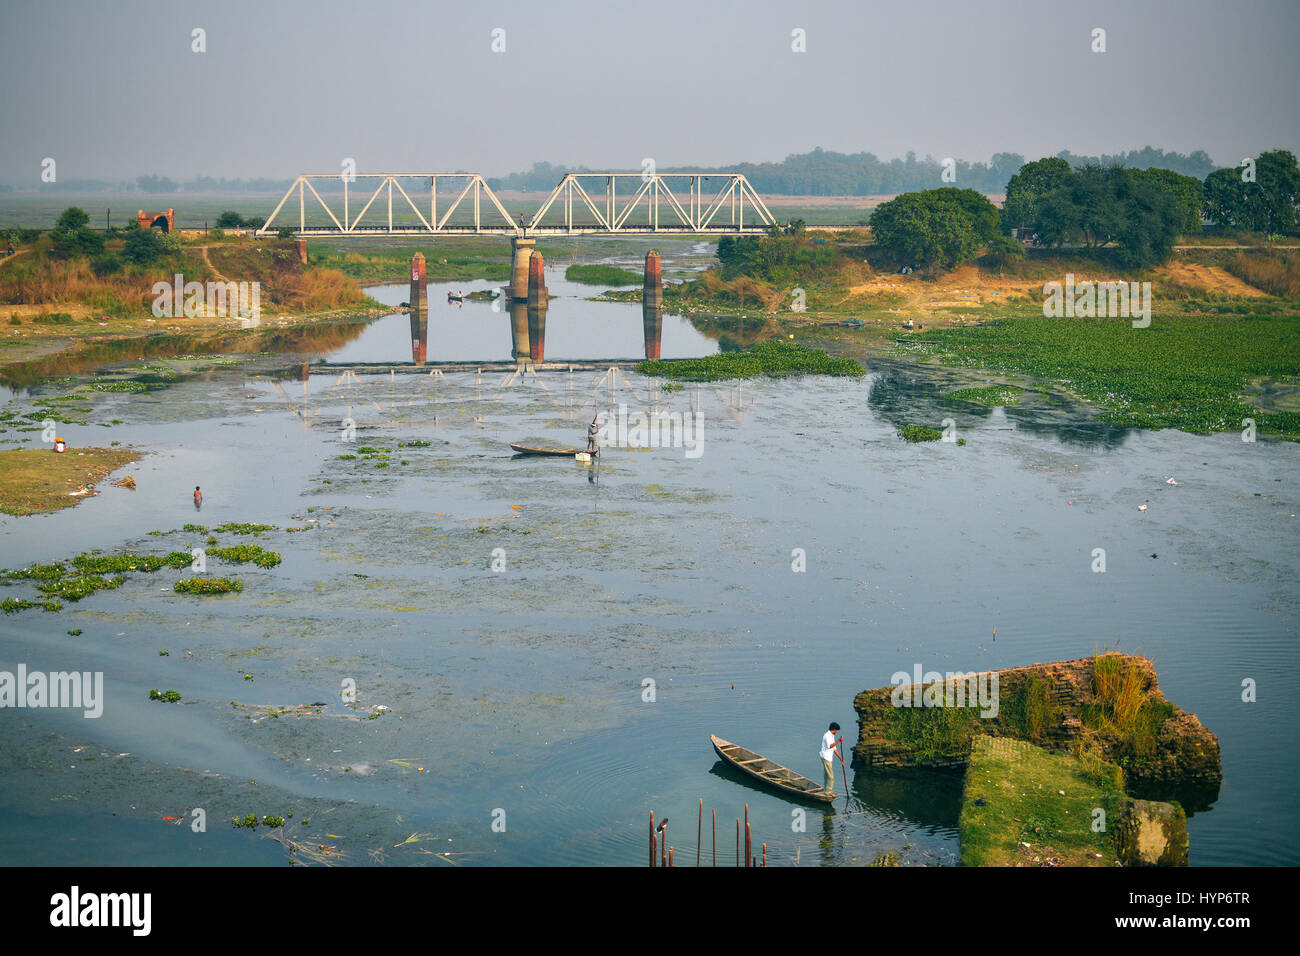 Life of India : Fishing boat in a river of India Stock Photo